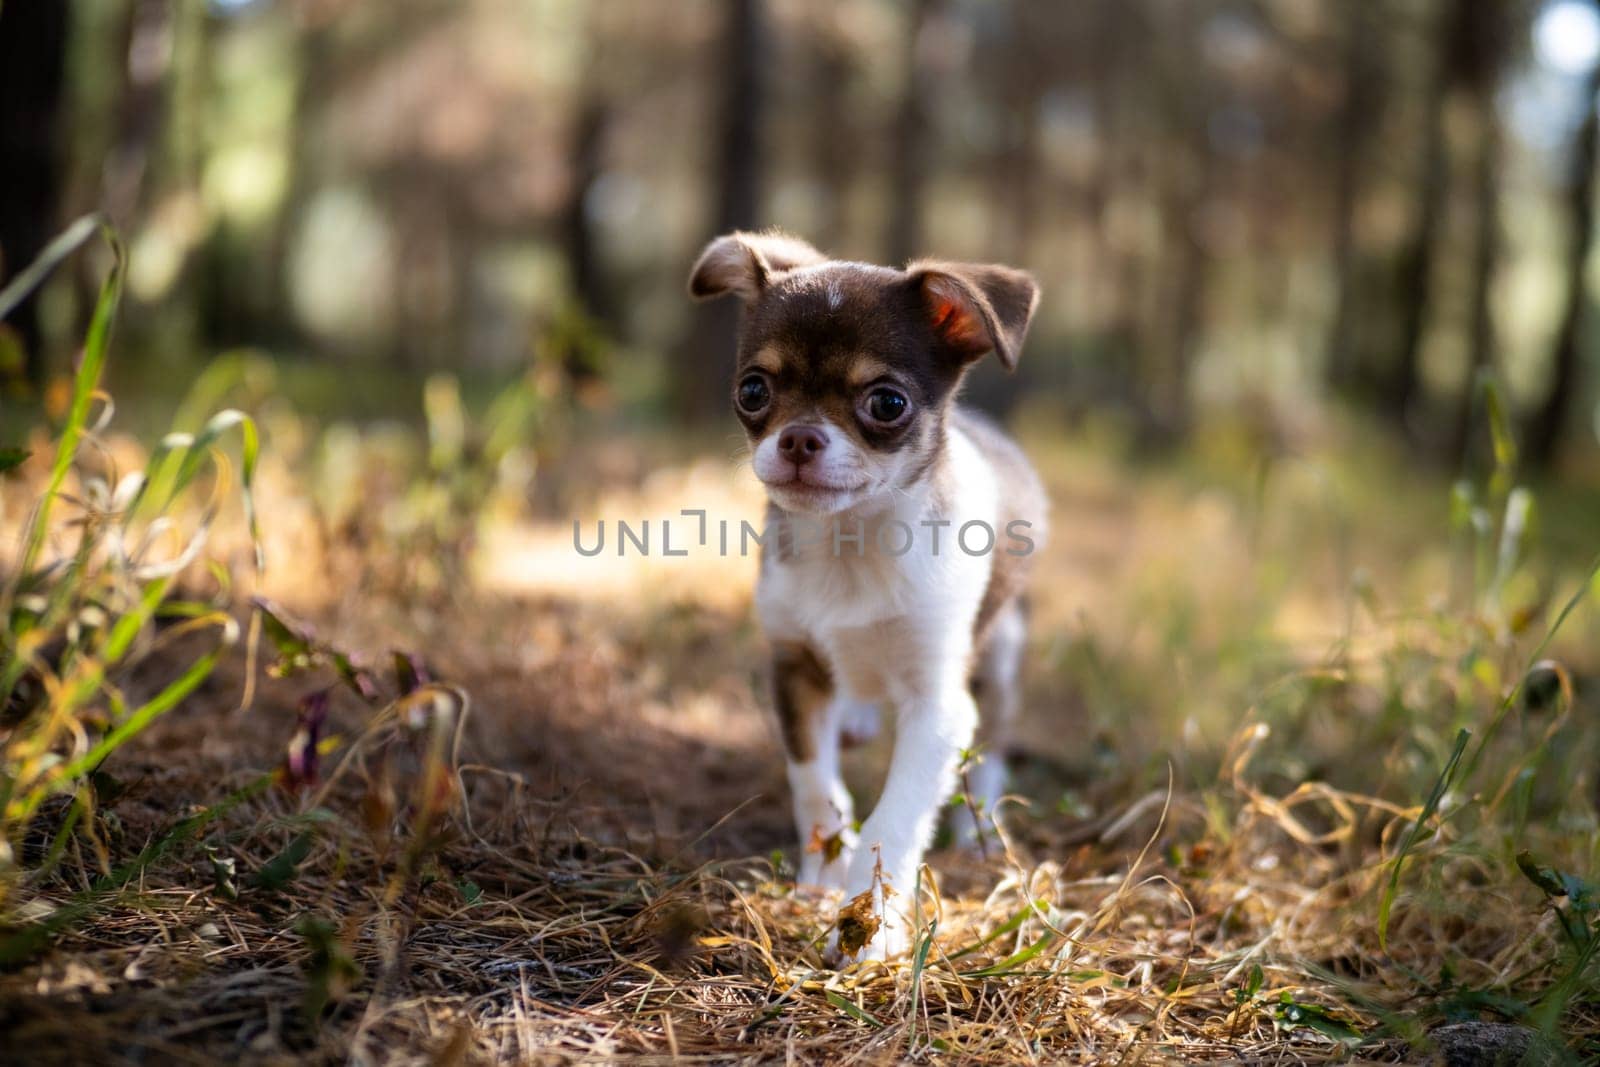 Chihuahua Puppy on a Sunlit Path by gcm